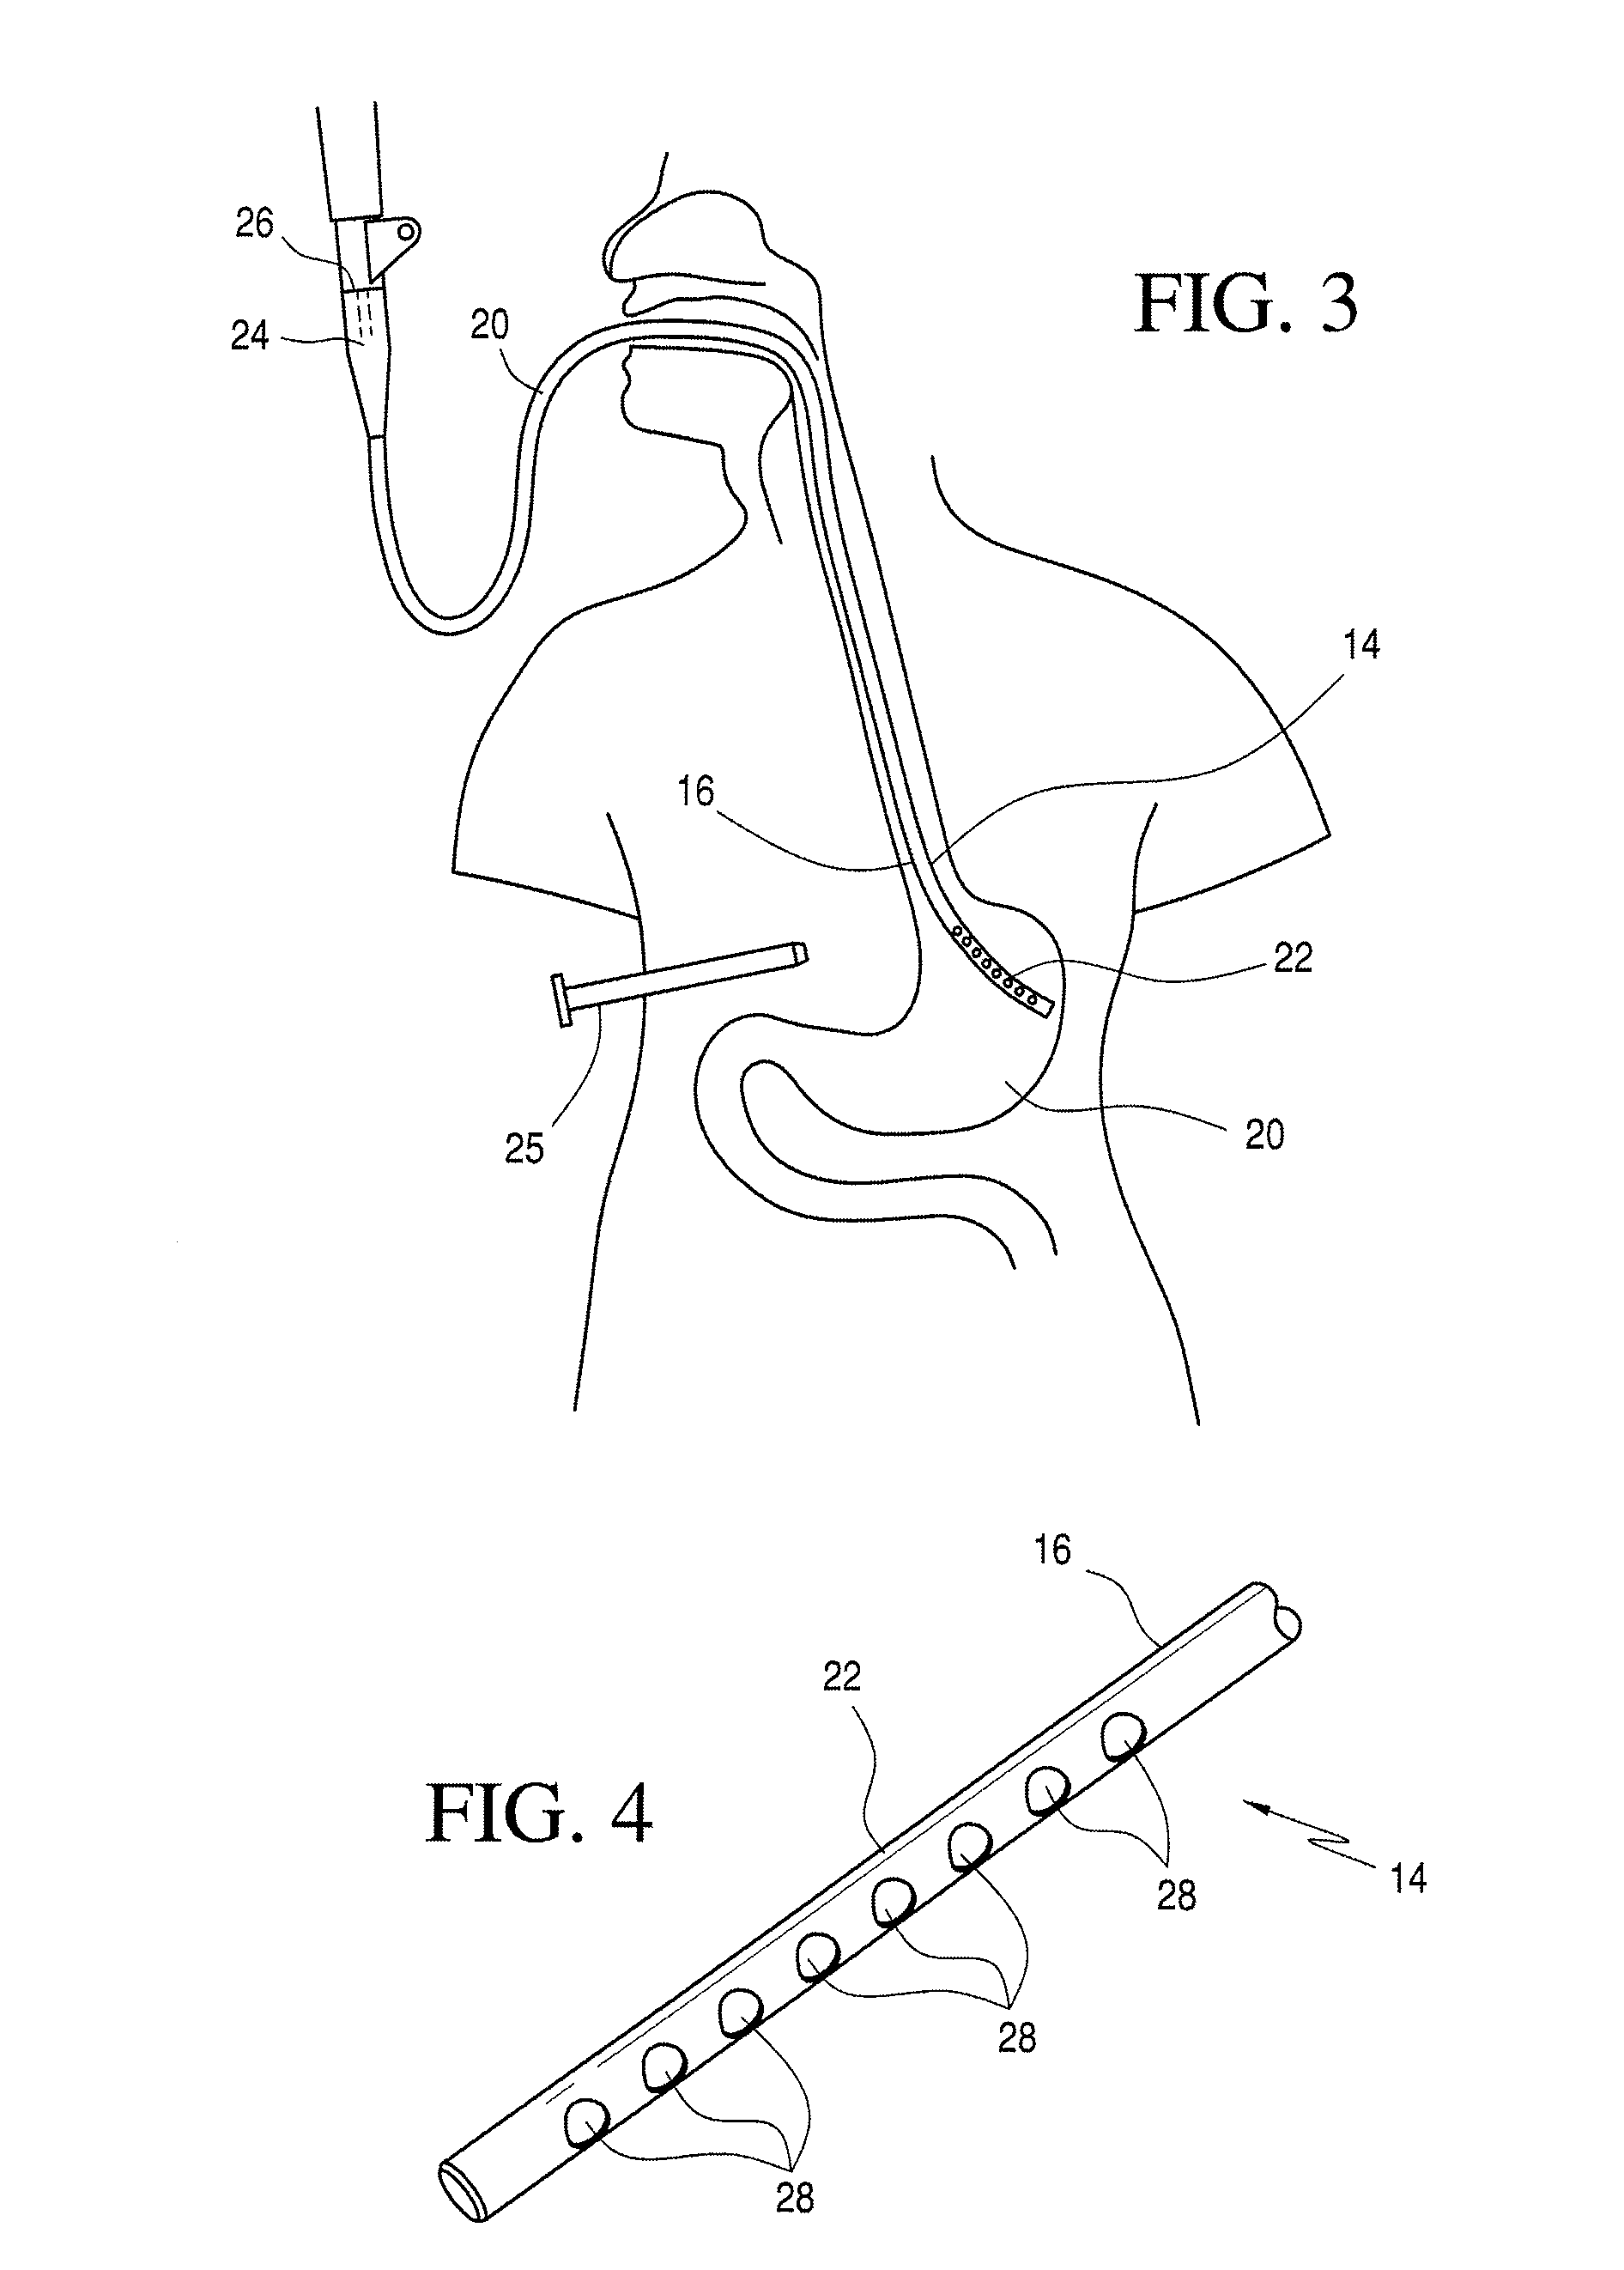 Method of rolling stomach tissue so as to maximize the contact surface area of a fold